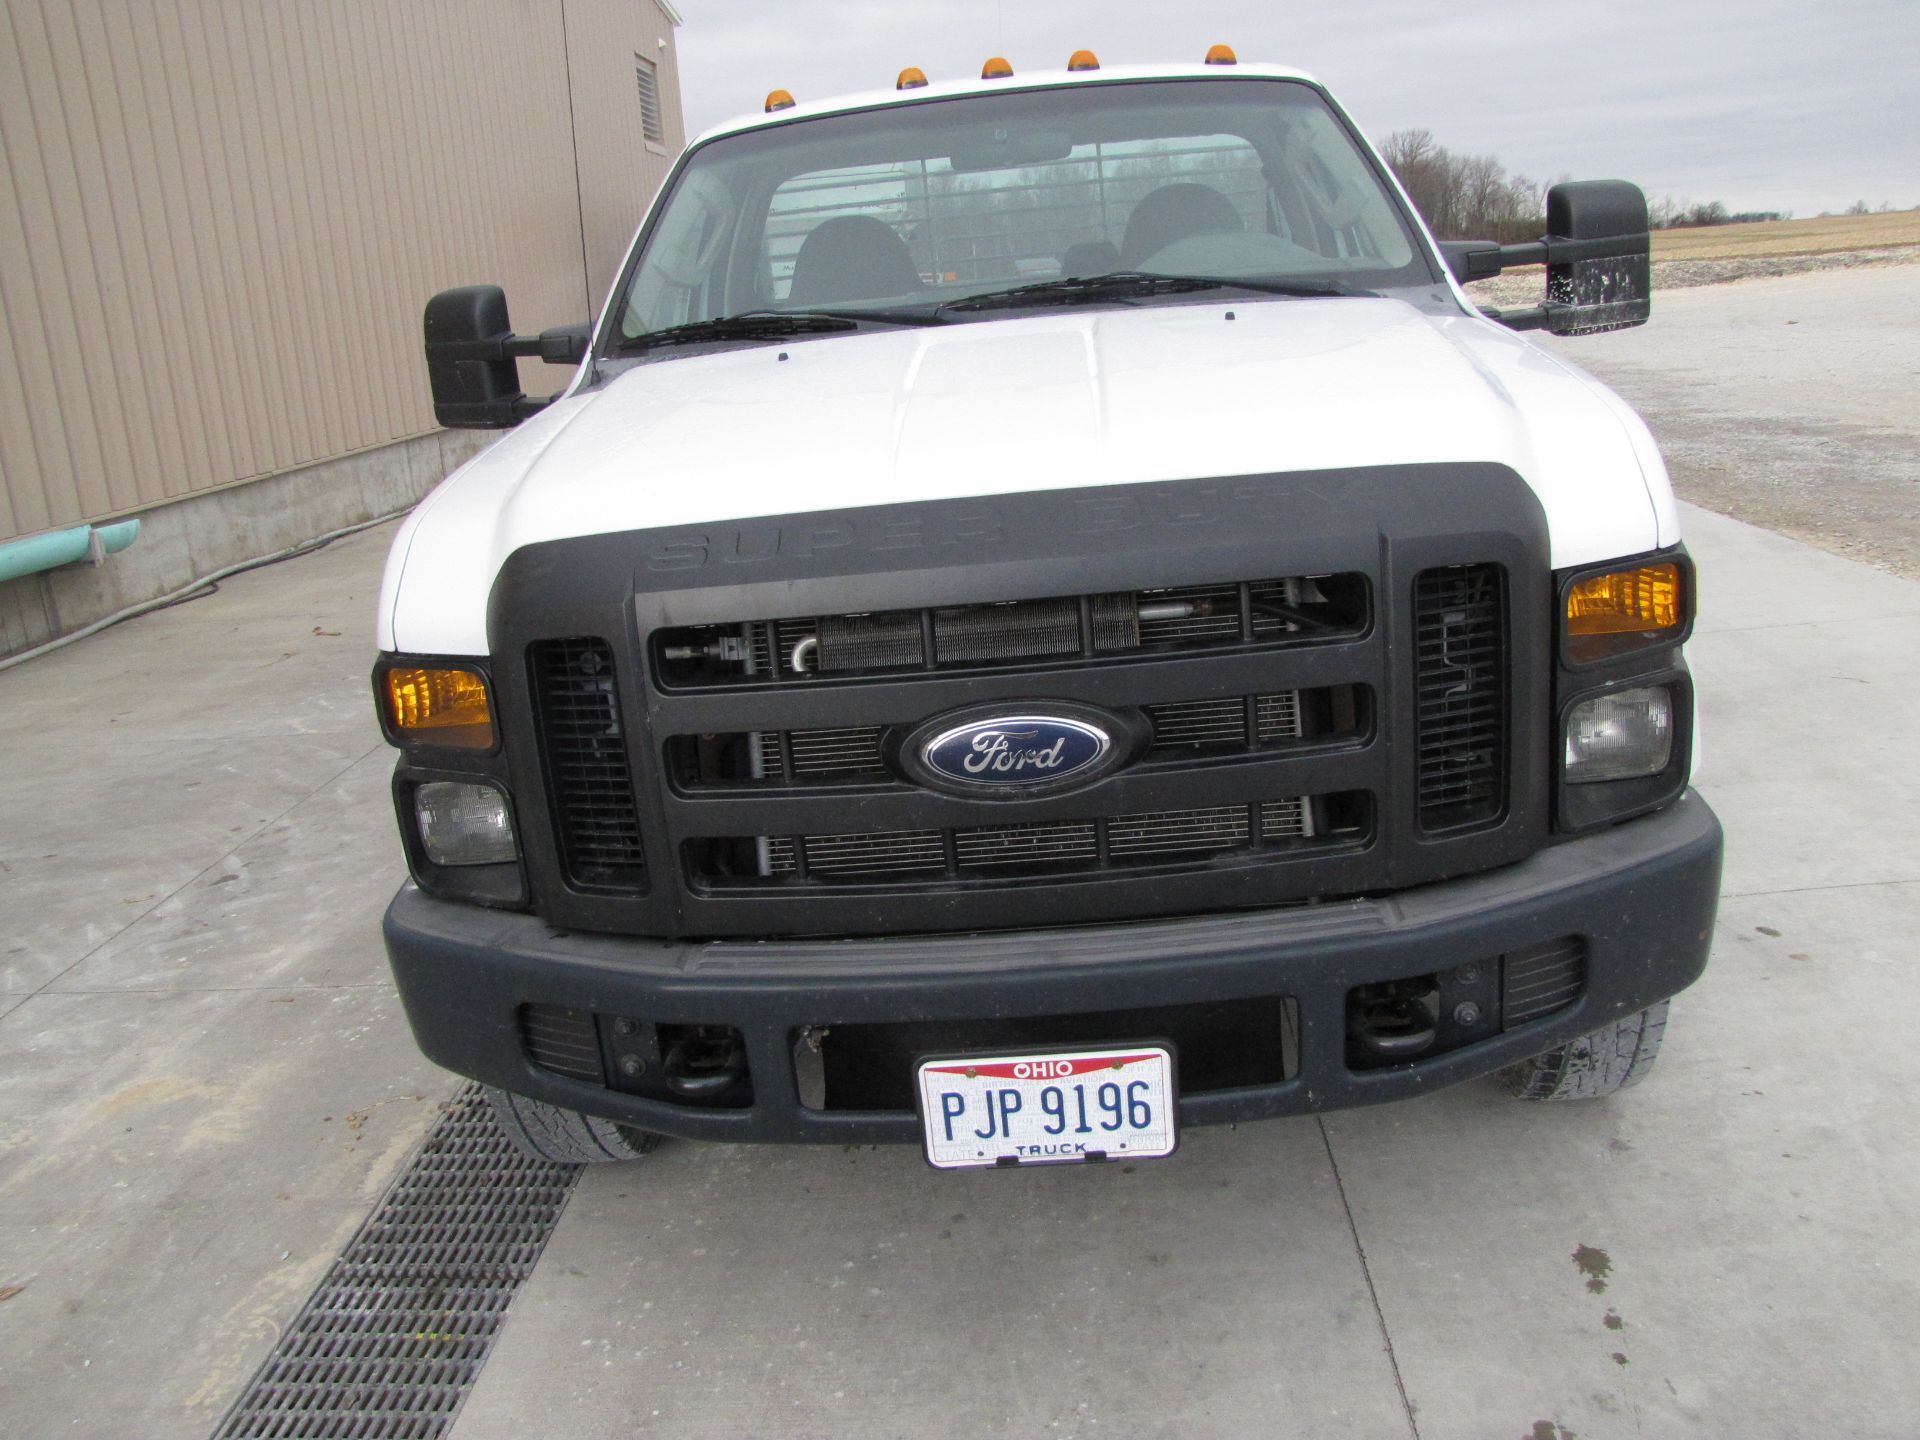 2009 Ford F350 XL Super Duty pickup truck - Image 13 of 55